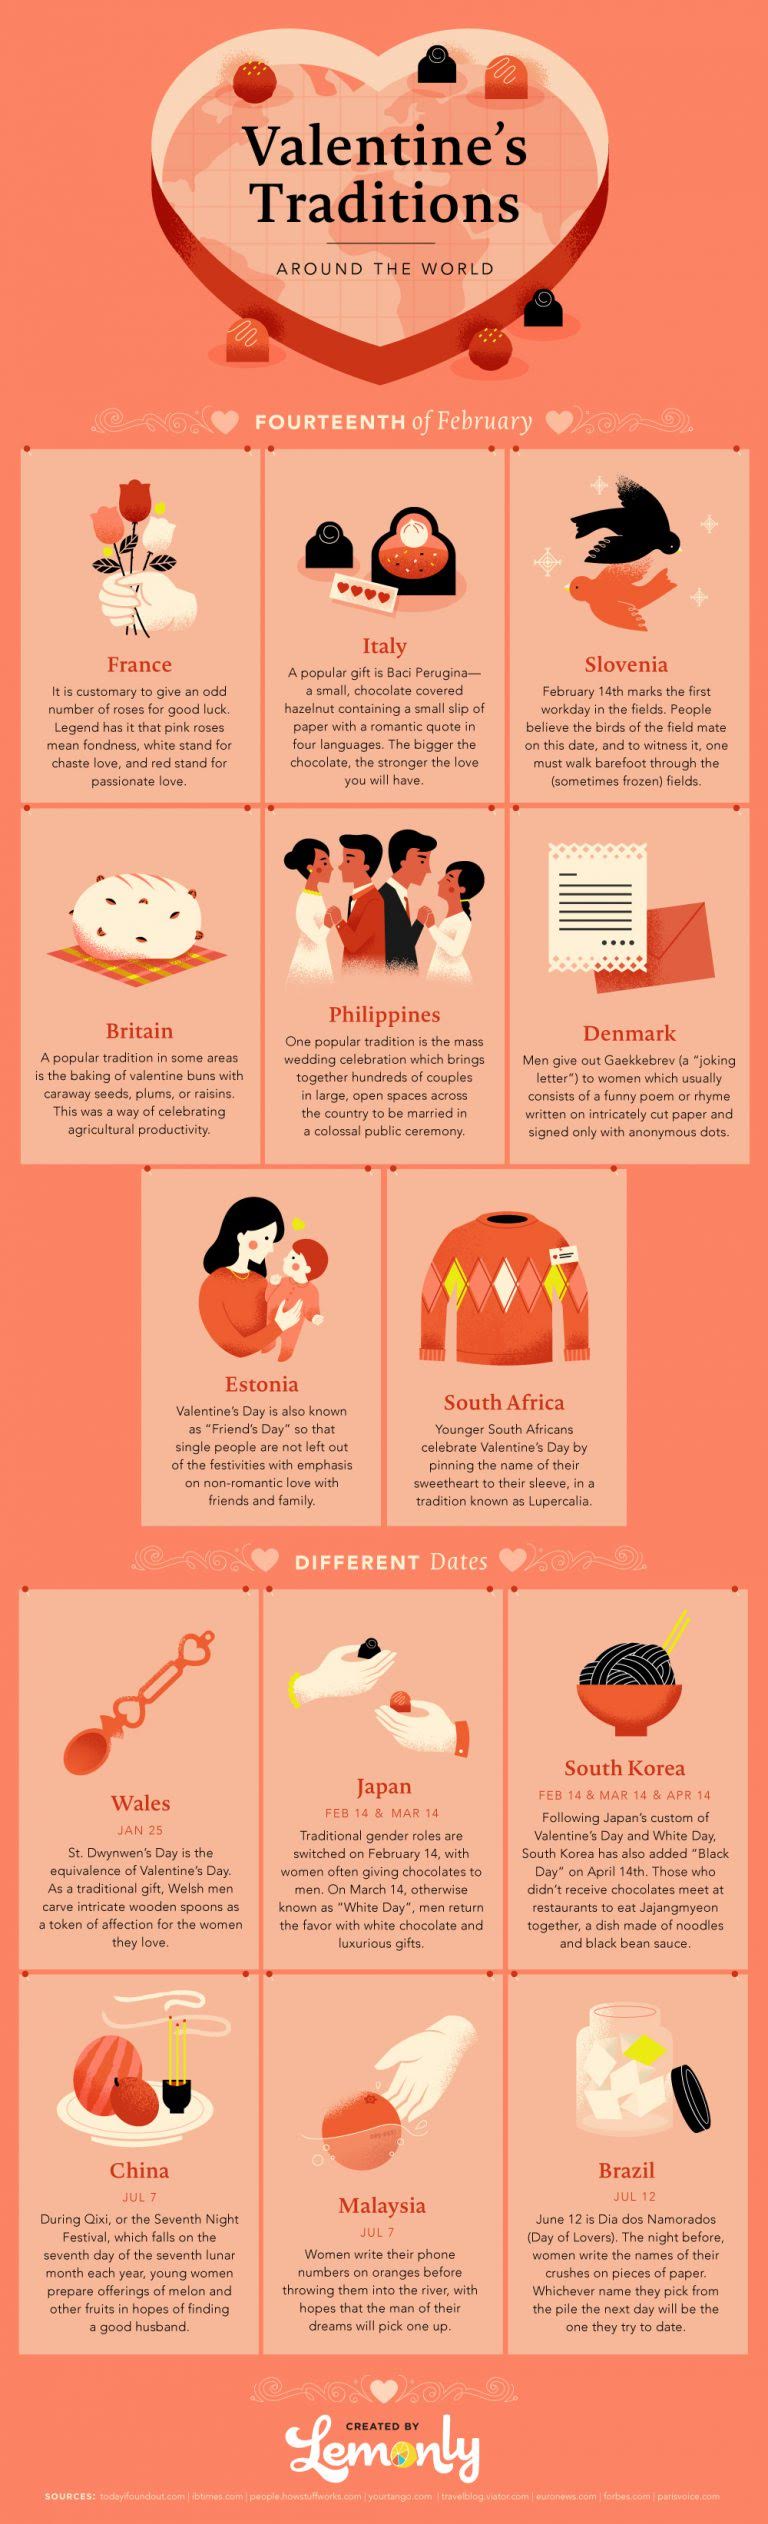 Valentine’s Traditions From Around The World #infographic